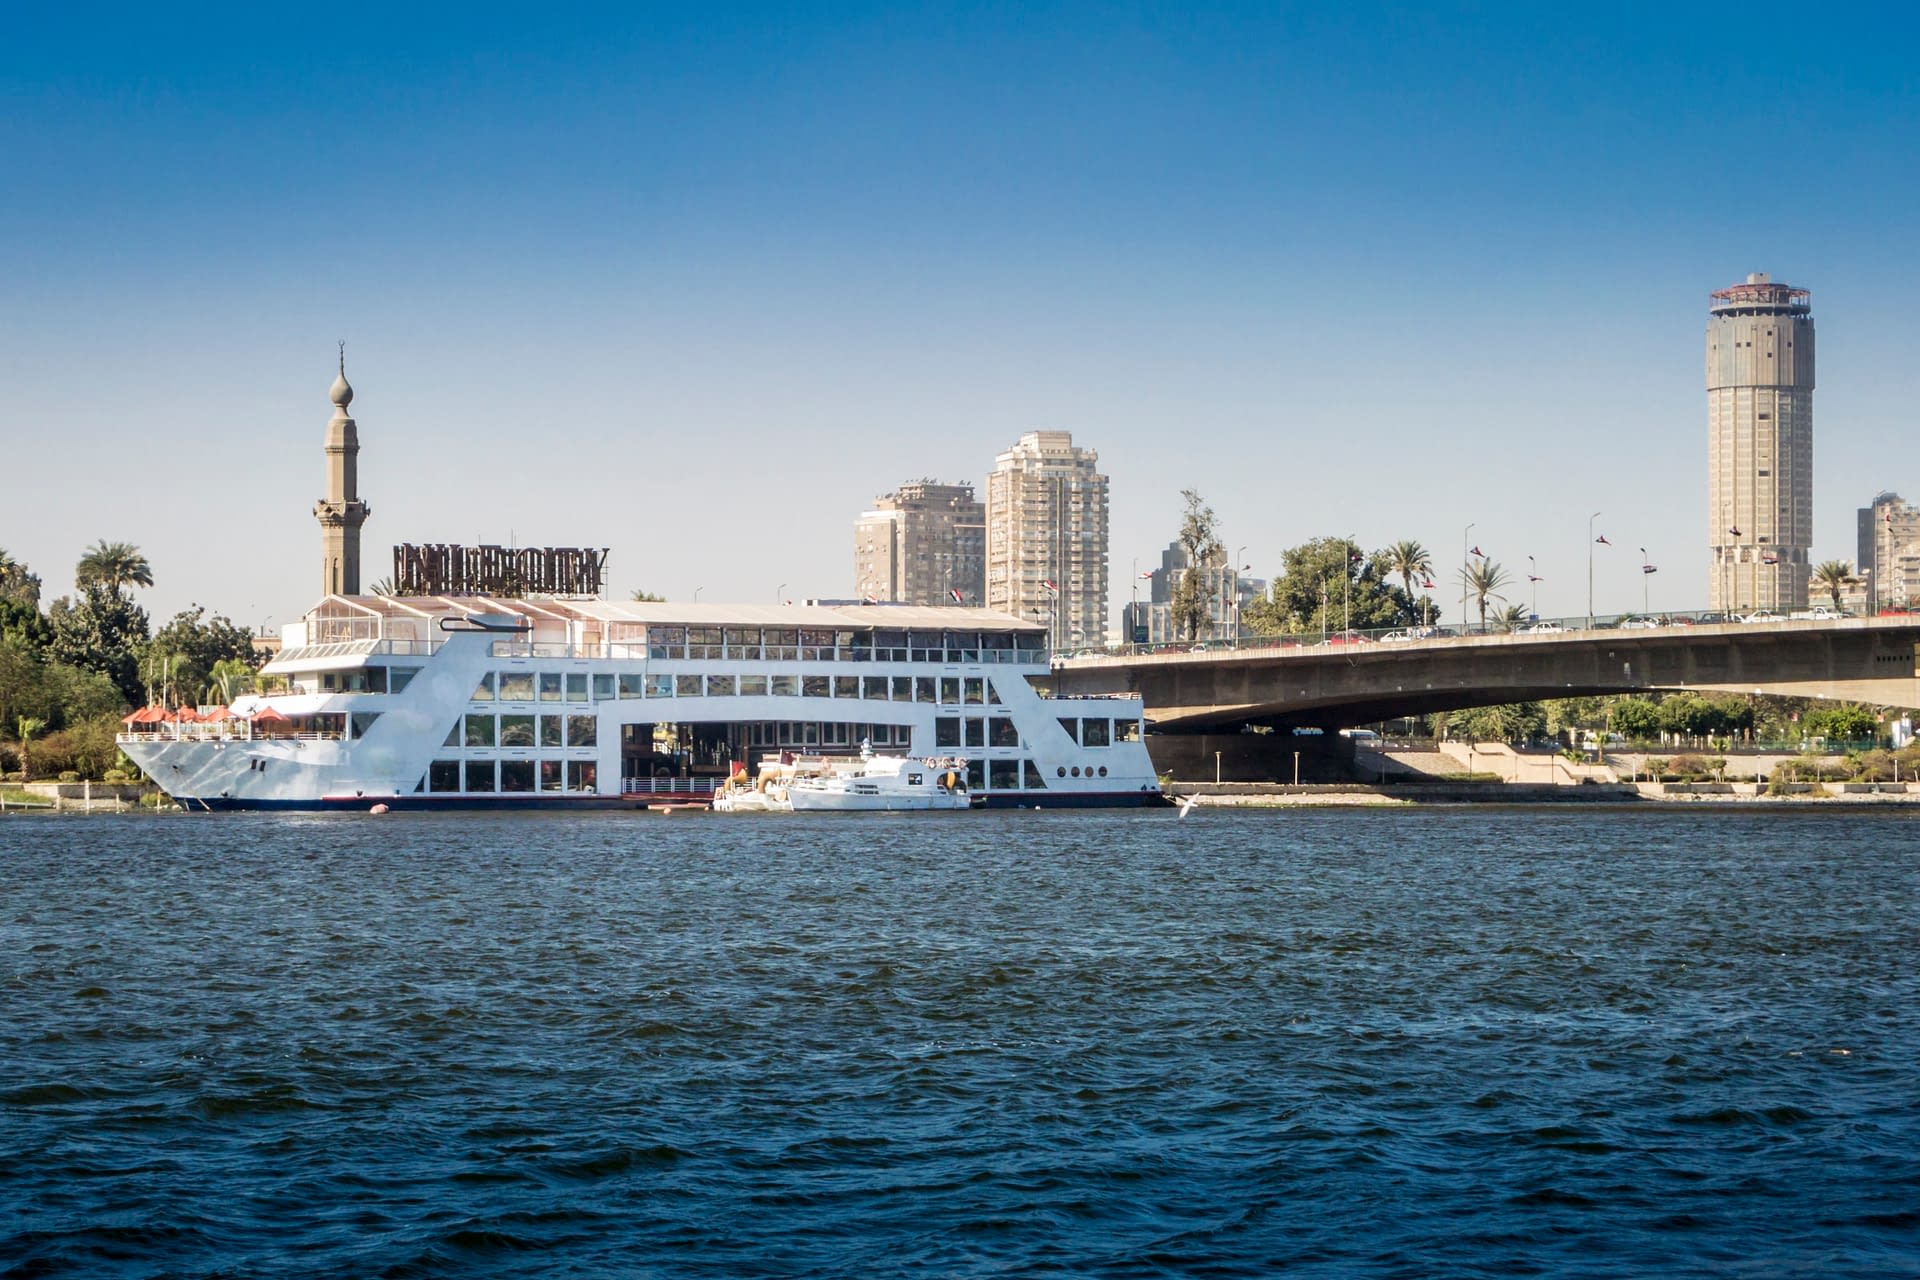 Pleasure ship on the River Nile with tower blocks in the background